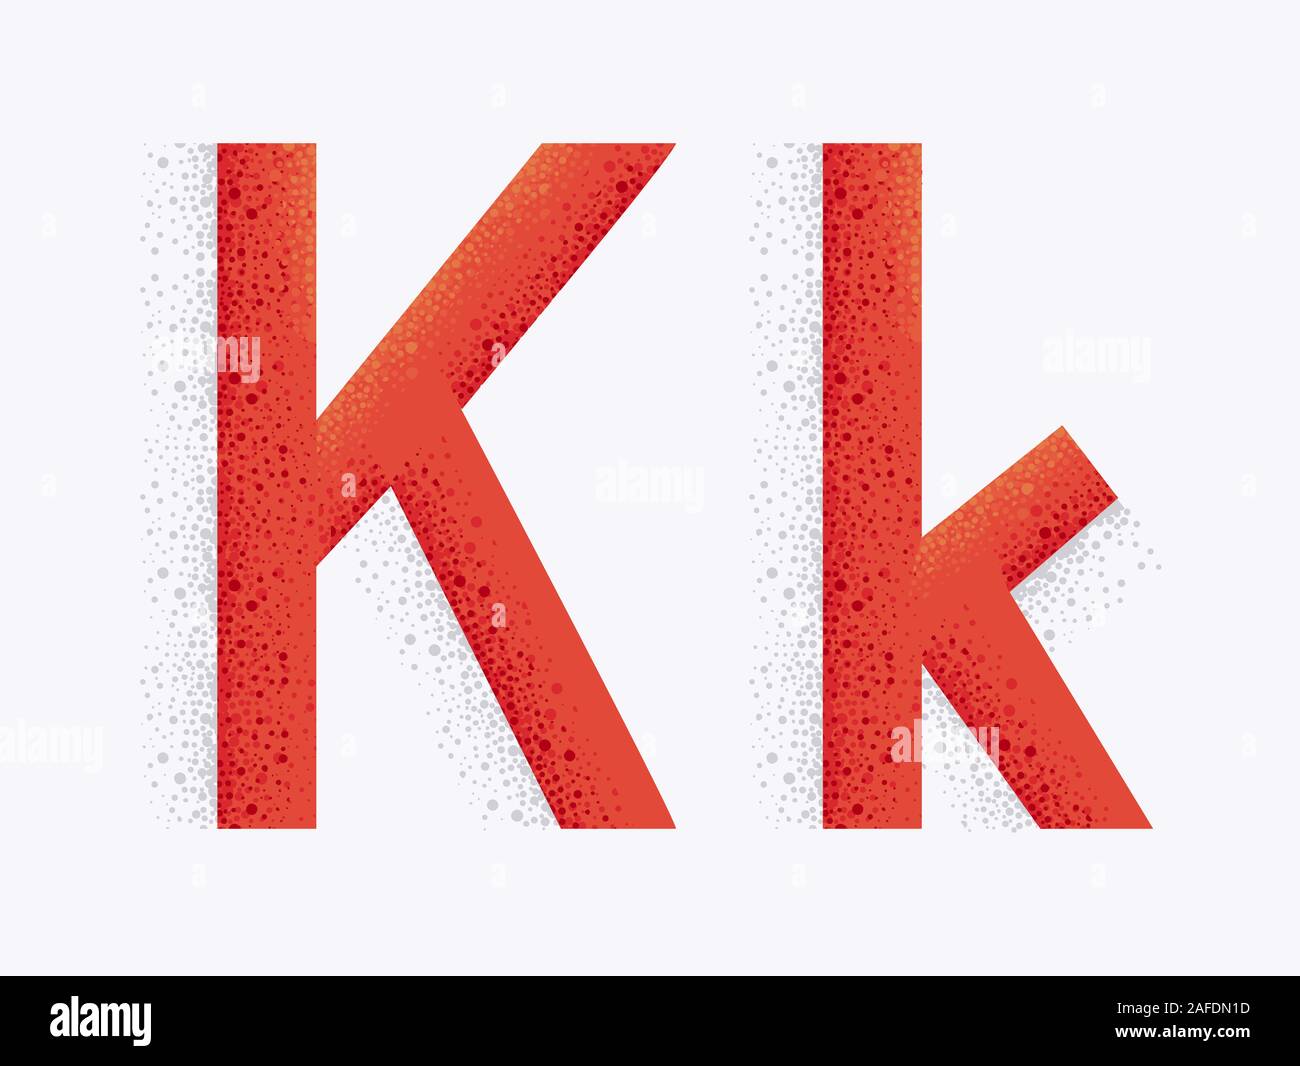 Illustration of Decorative Alphabet with Capital and Small Letter K and Dust Particle Effect Stock Photo